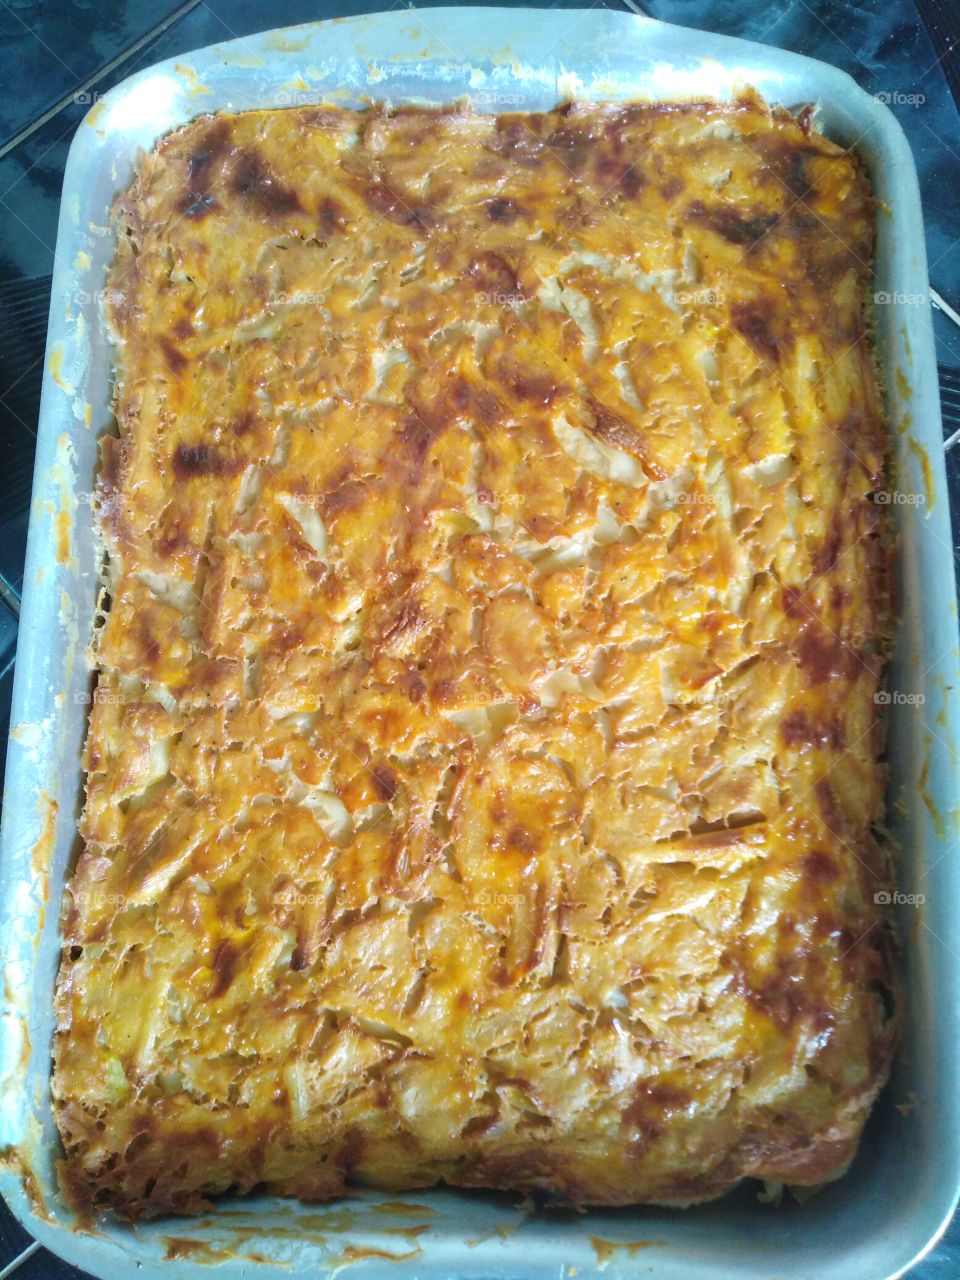 tray Macaroni consists of two layers of macaroni stuffed beef stuffed with a layer of egg and this image after entering the oven